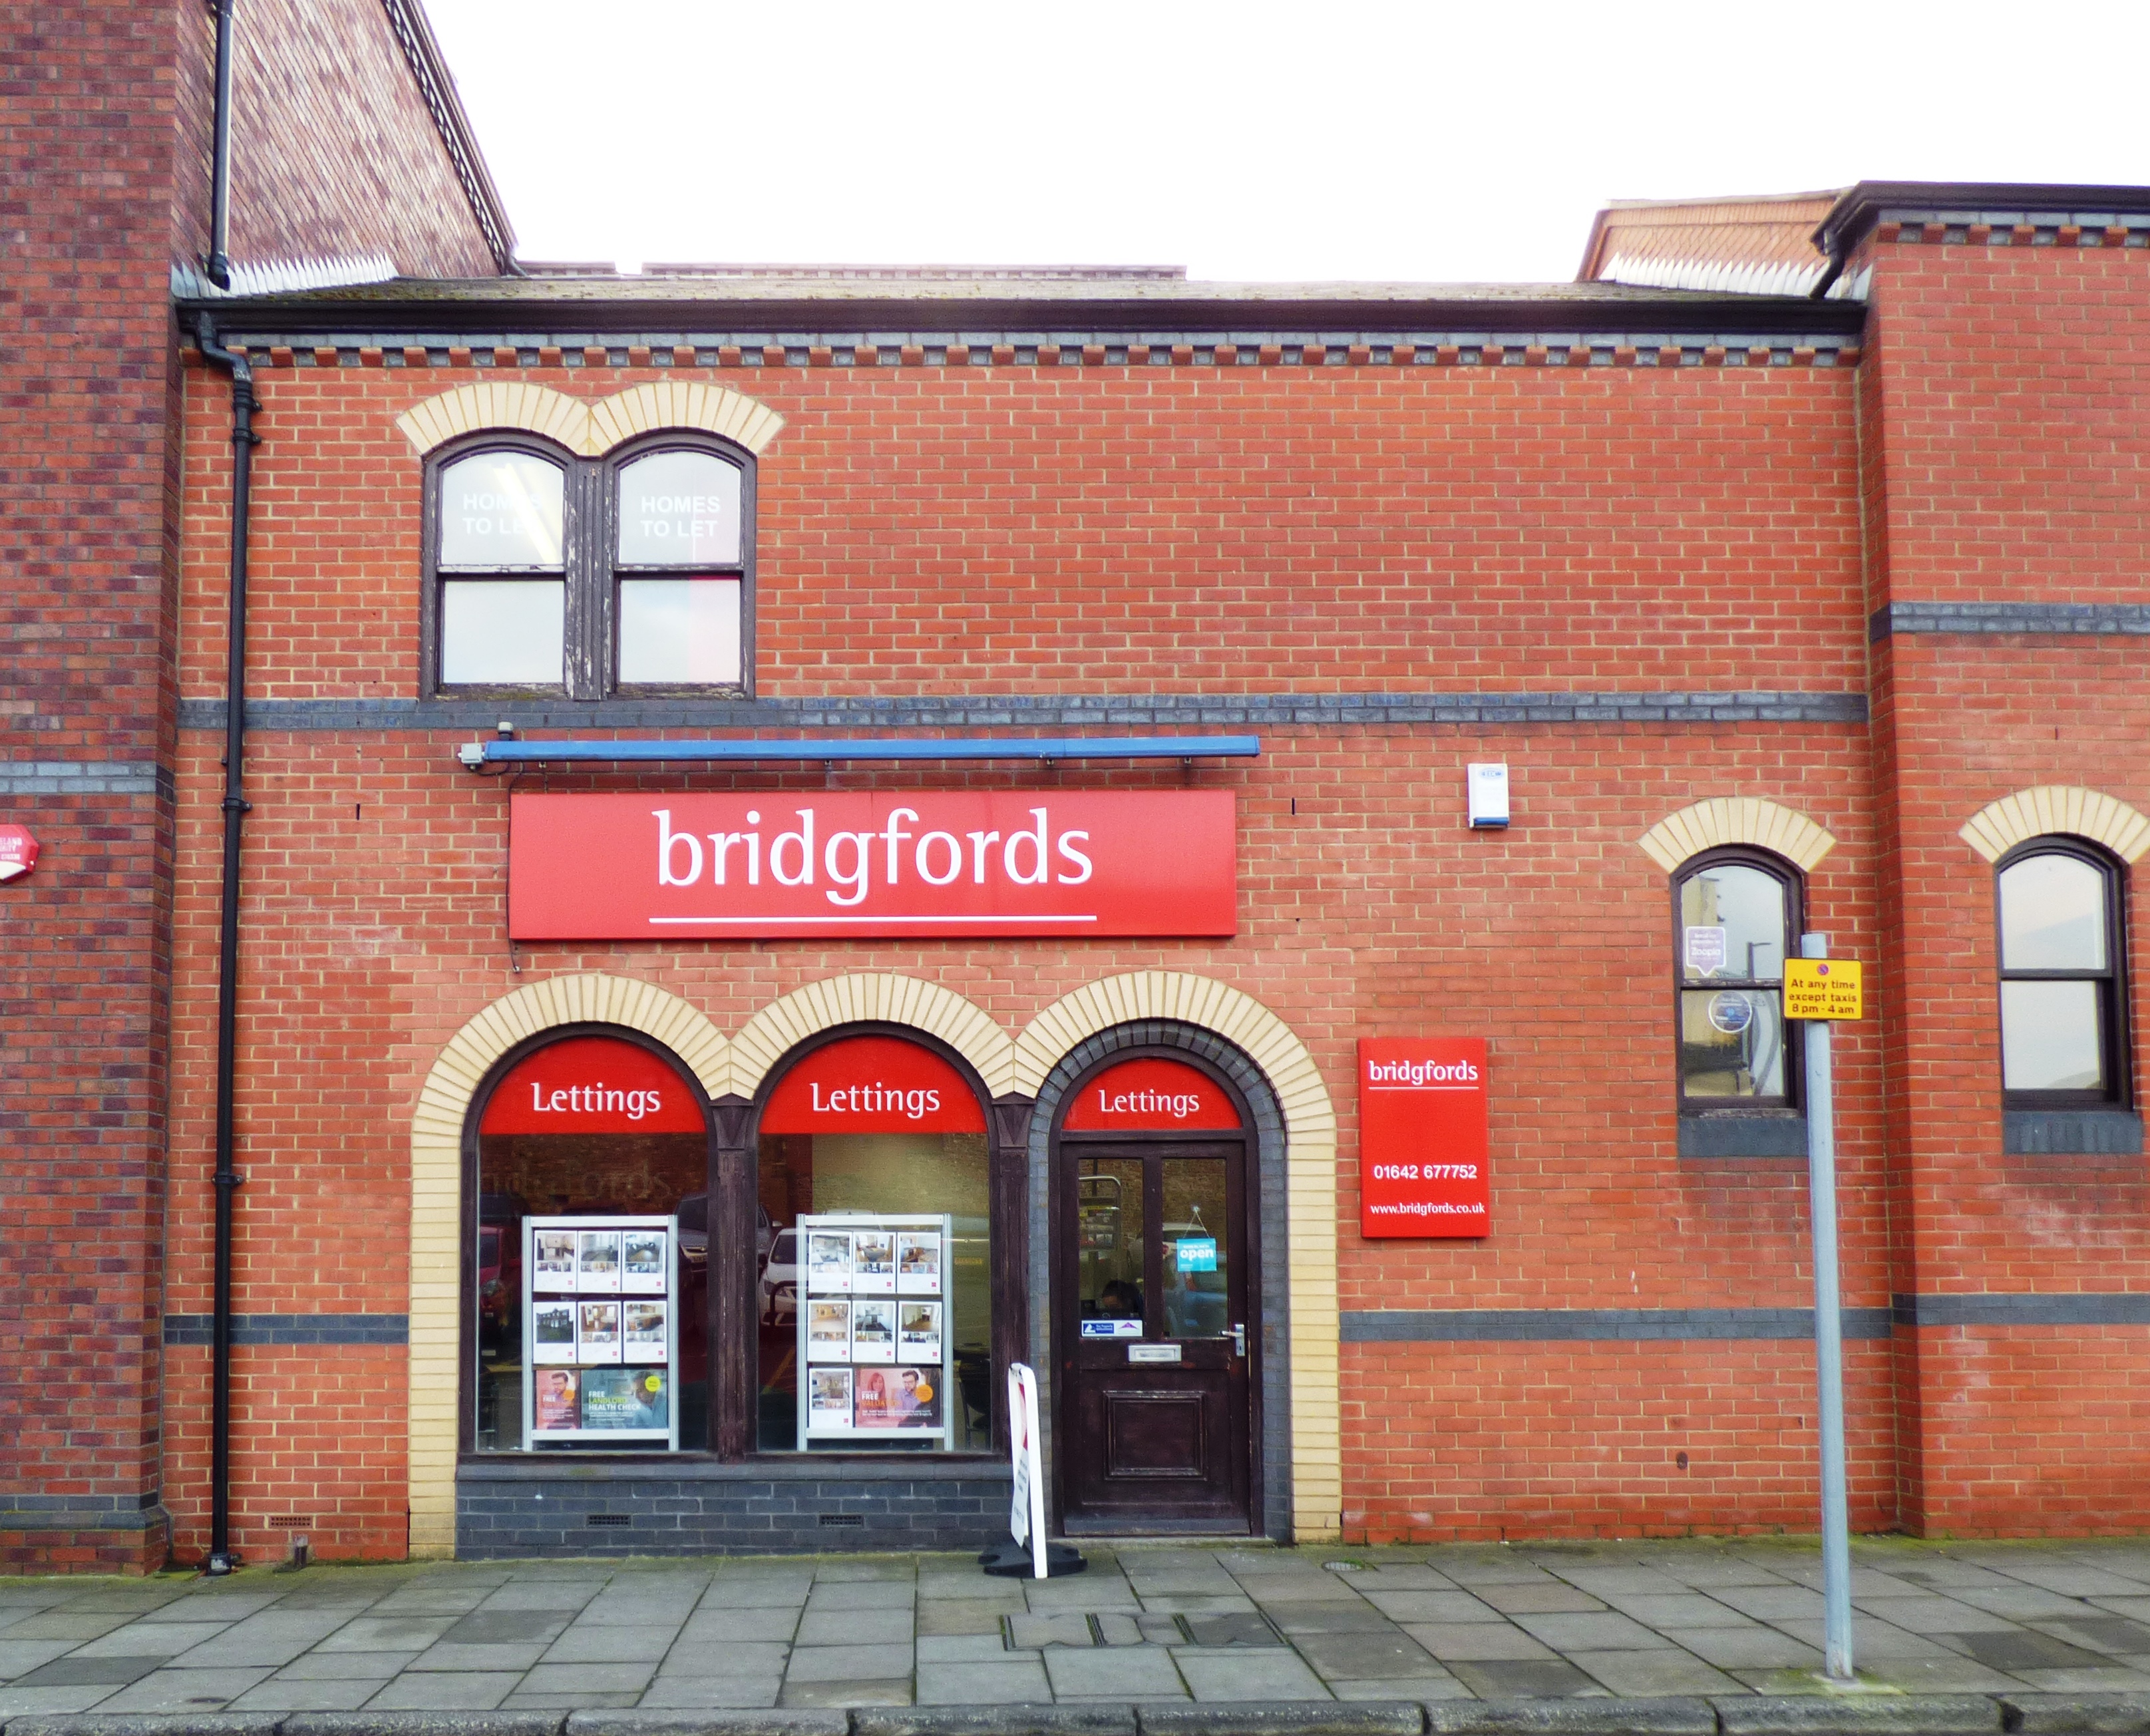 Images Bridgfords Letting Agents Stockton on Tees - Closed